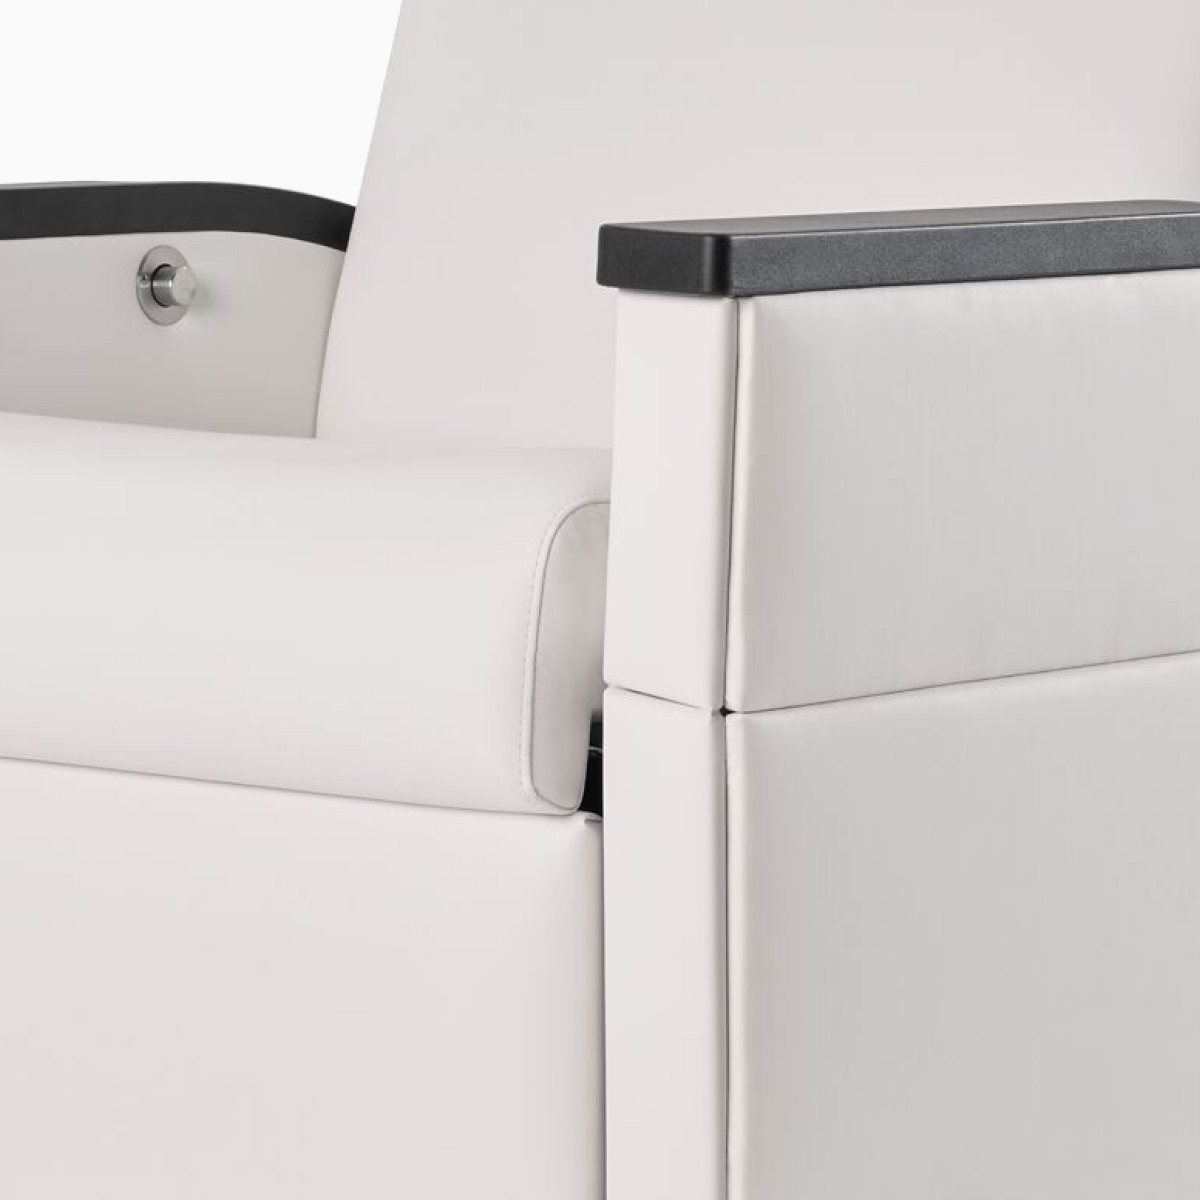 Close-up of removable covers on Nemschoff Pristo Recliner arms in a white upholstery.